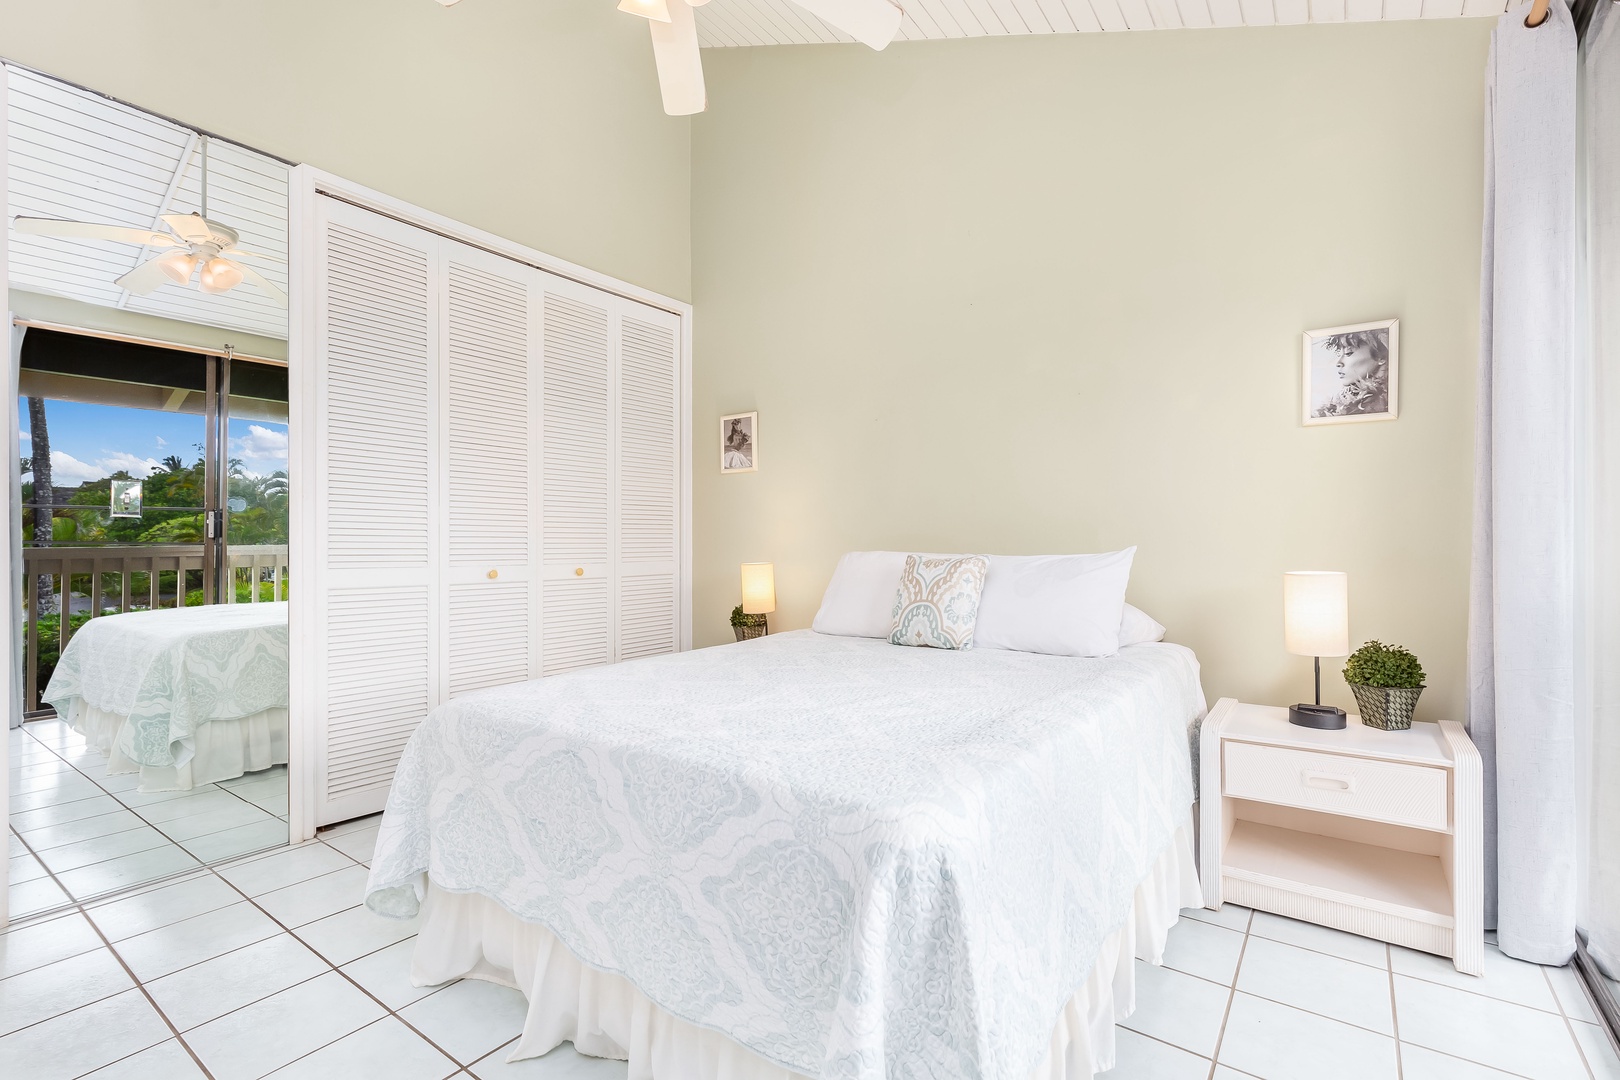 Kahuku Vacation Rentals, Ilima West Kuilima Estates #18 at Turtle Bay - Welcome to the main bedroom where simplicity meets comfort for a rejuvenating rest.